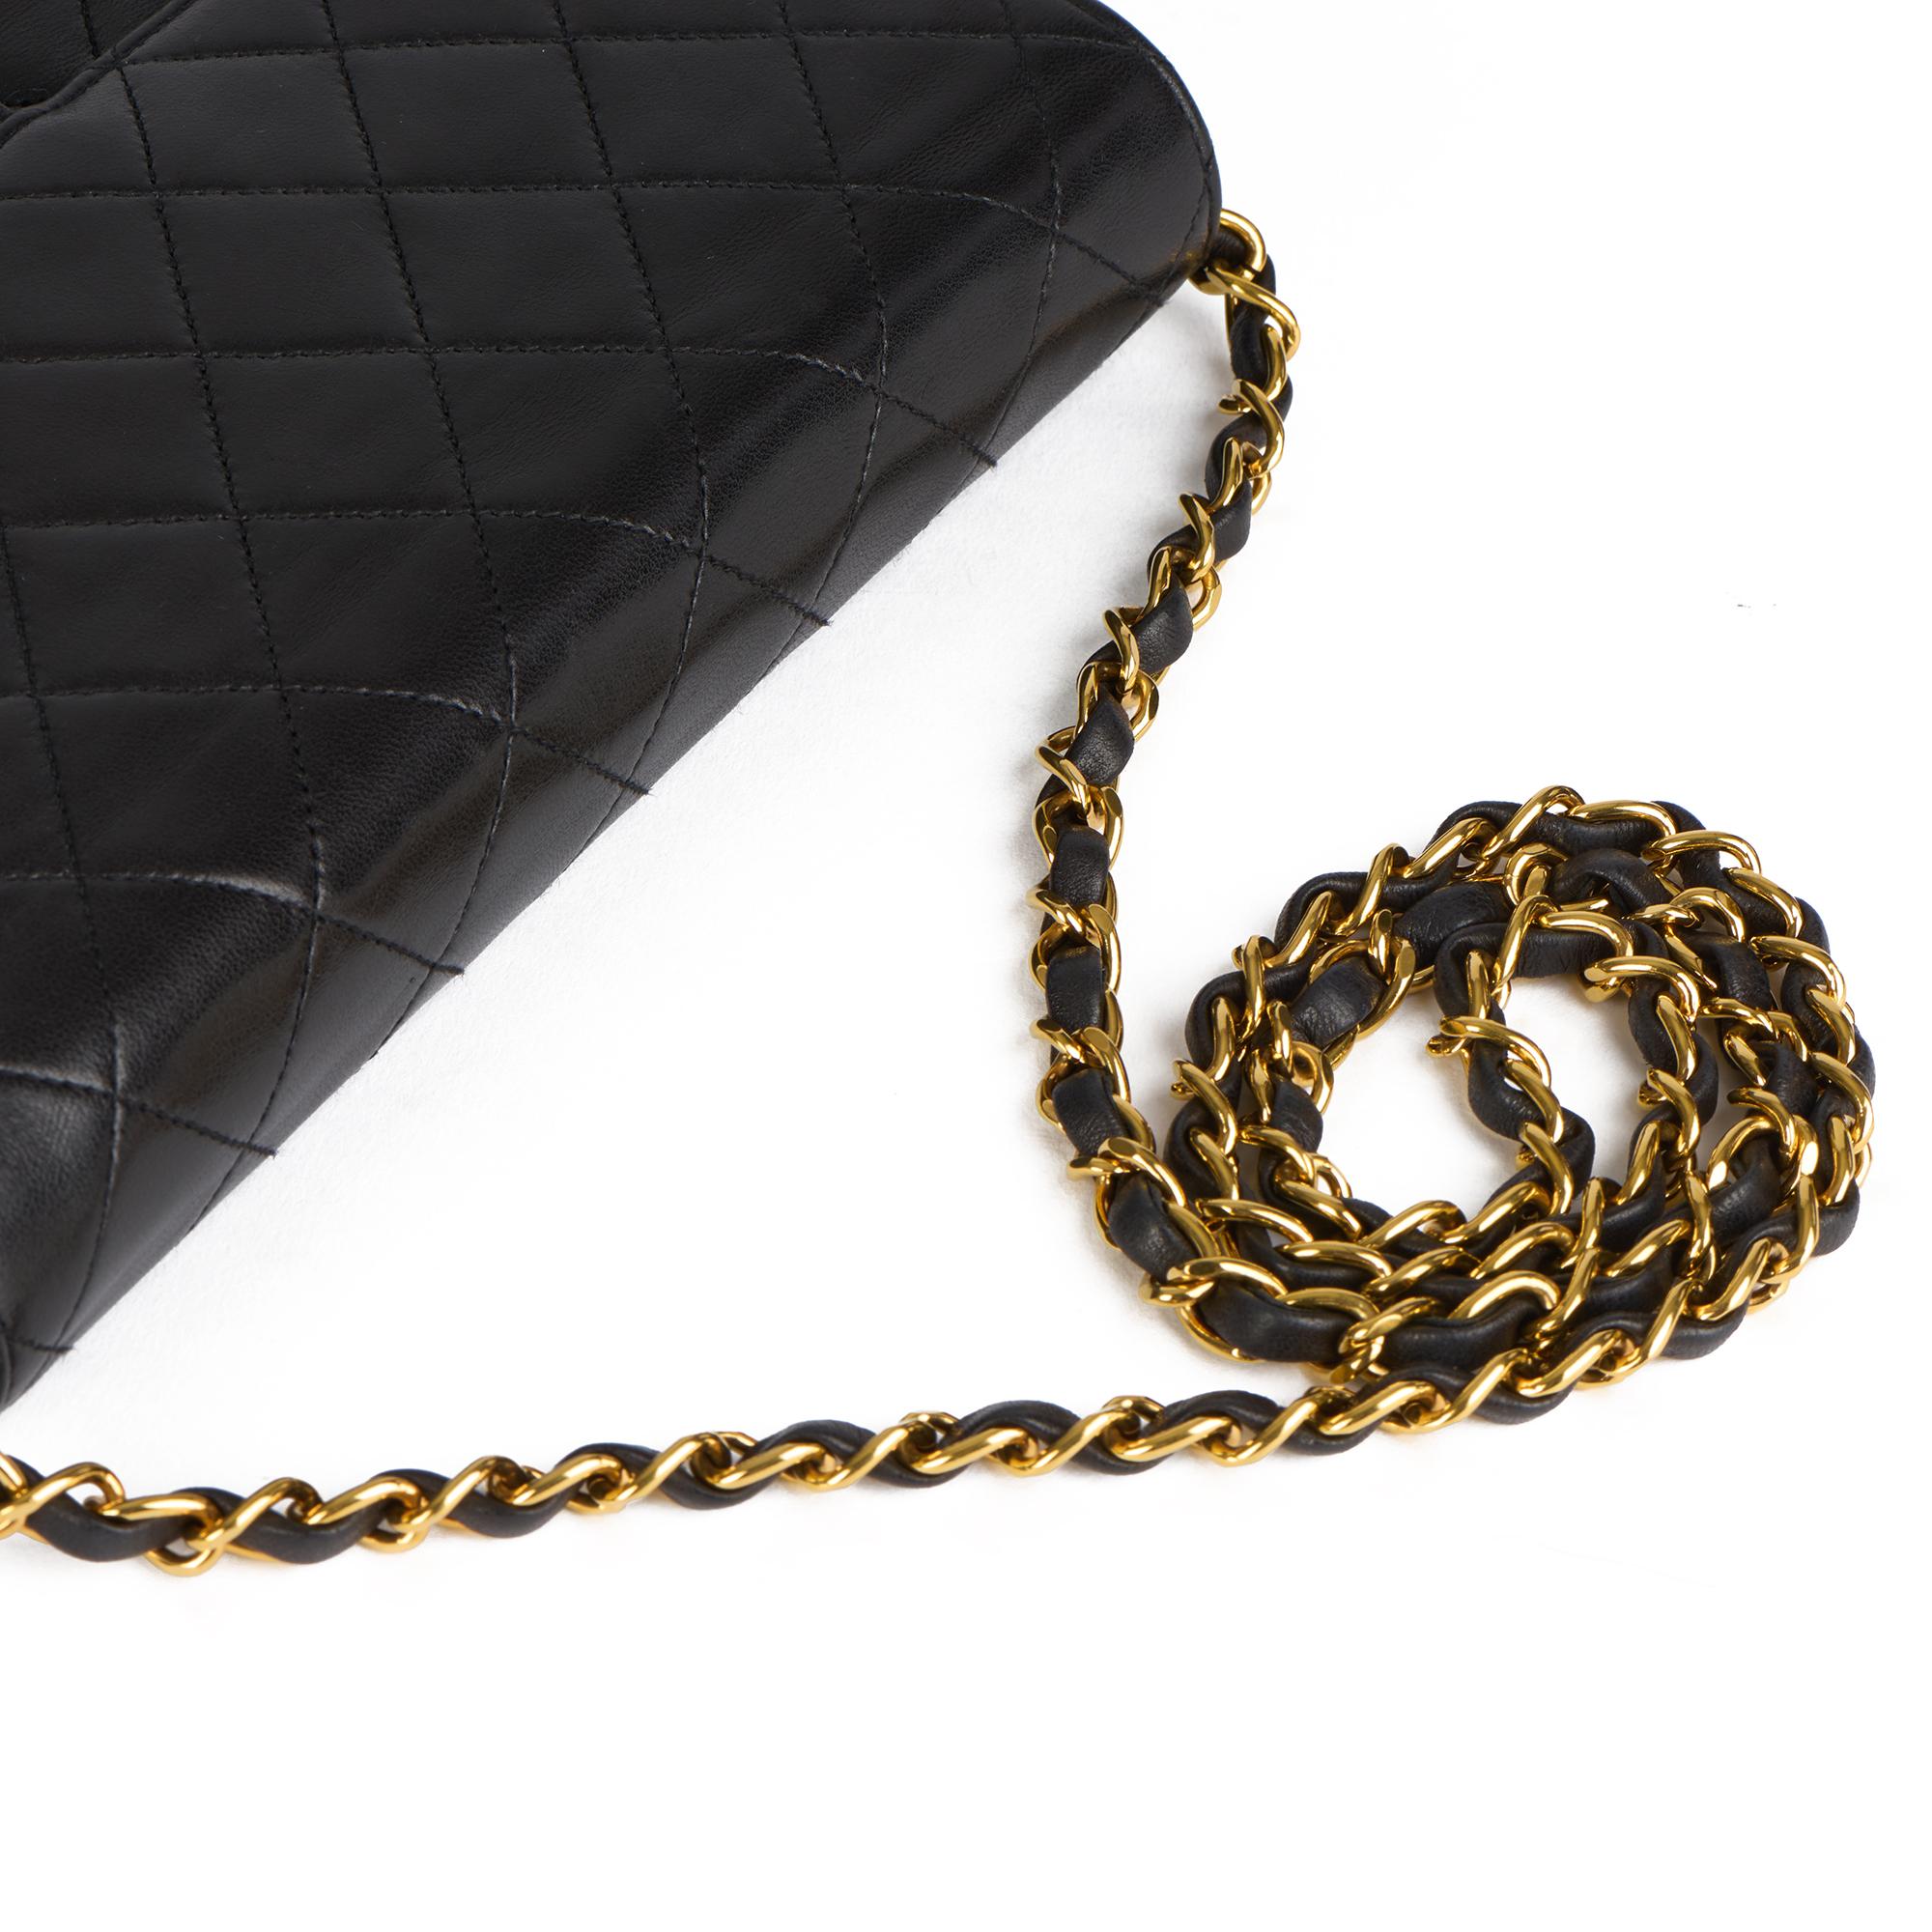 1995 Chanel Black Quilted Lambskin Vintage Small Classic Single Flap Bag 4